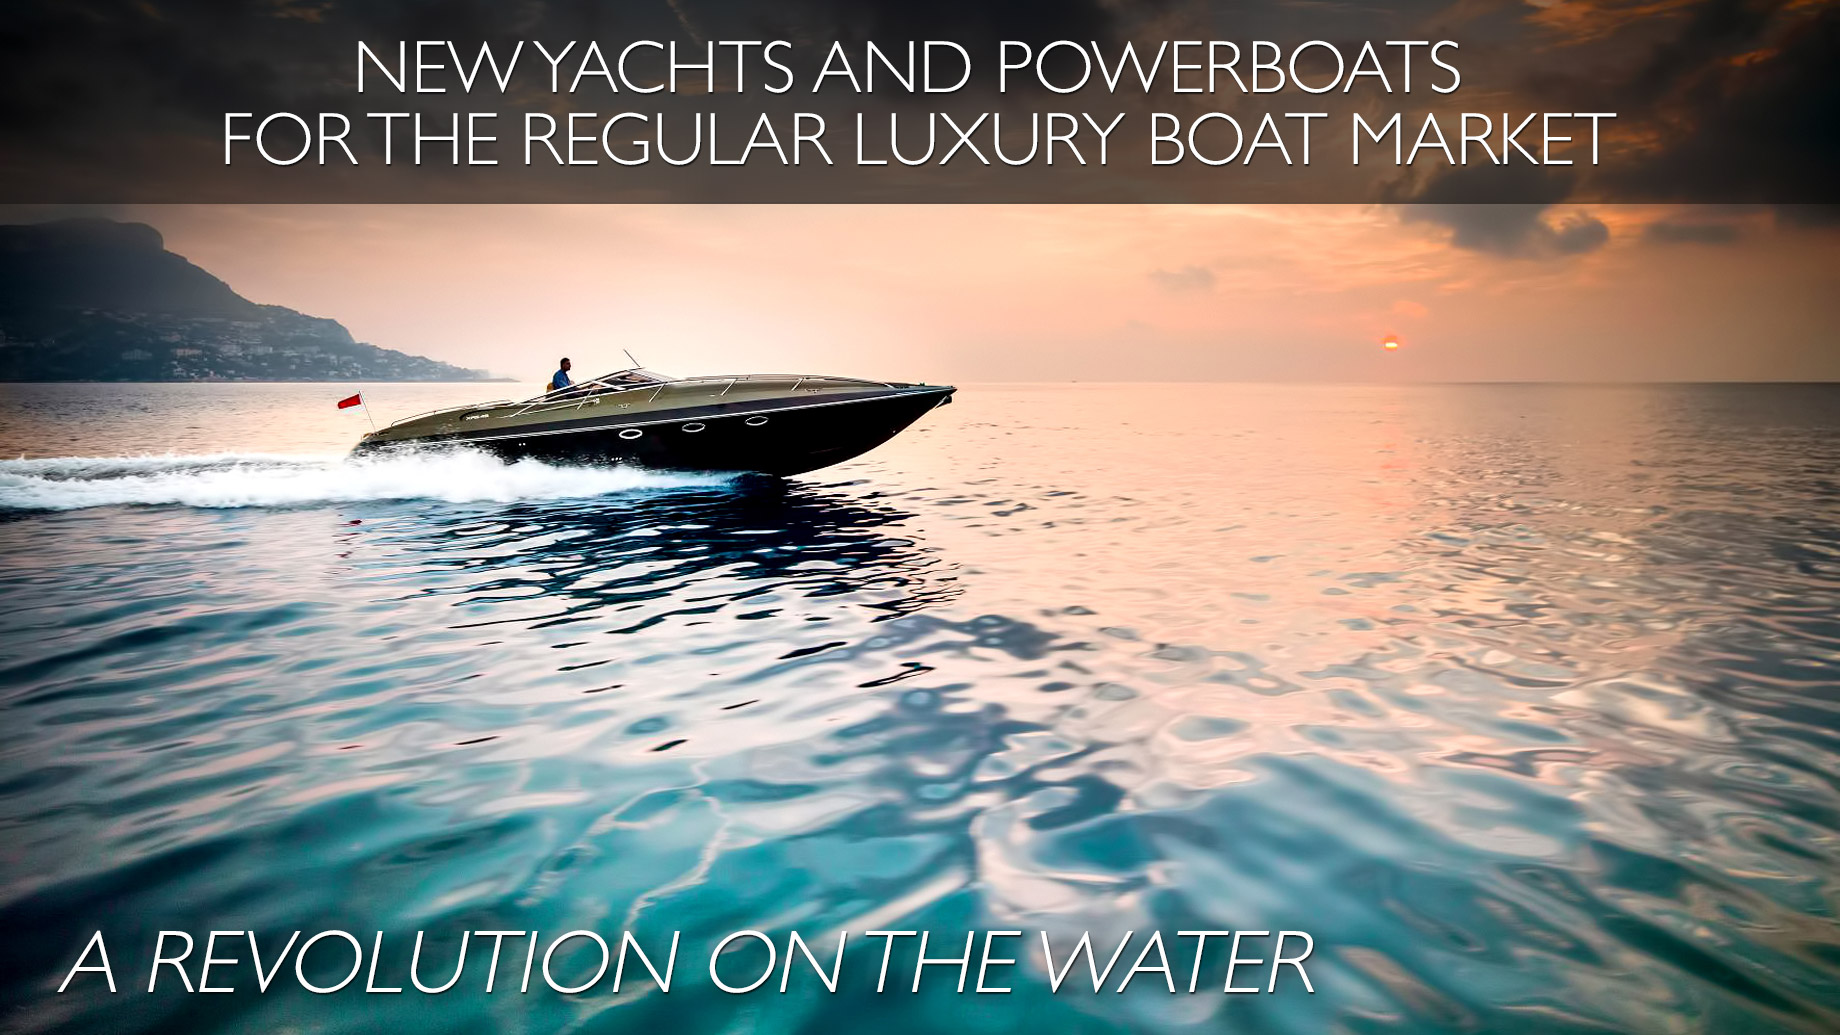 A Revolution on the Water – New Yachts and Powerboats for the Regular Luxury Boat Market